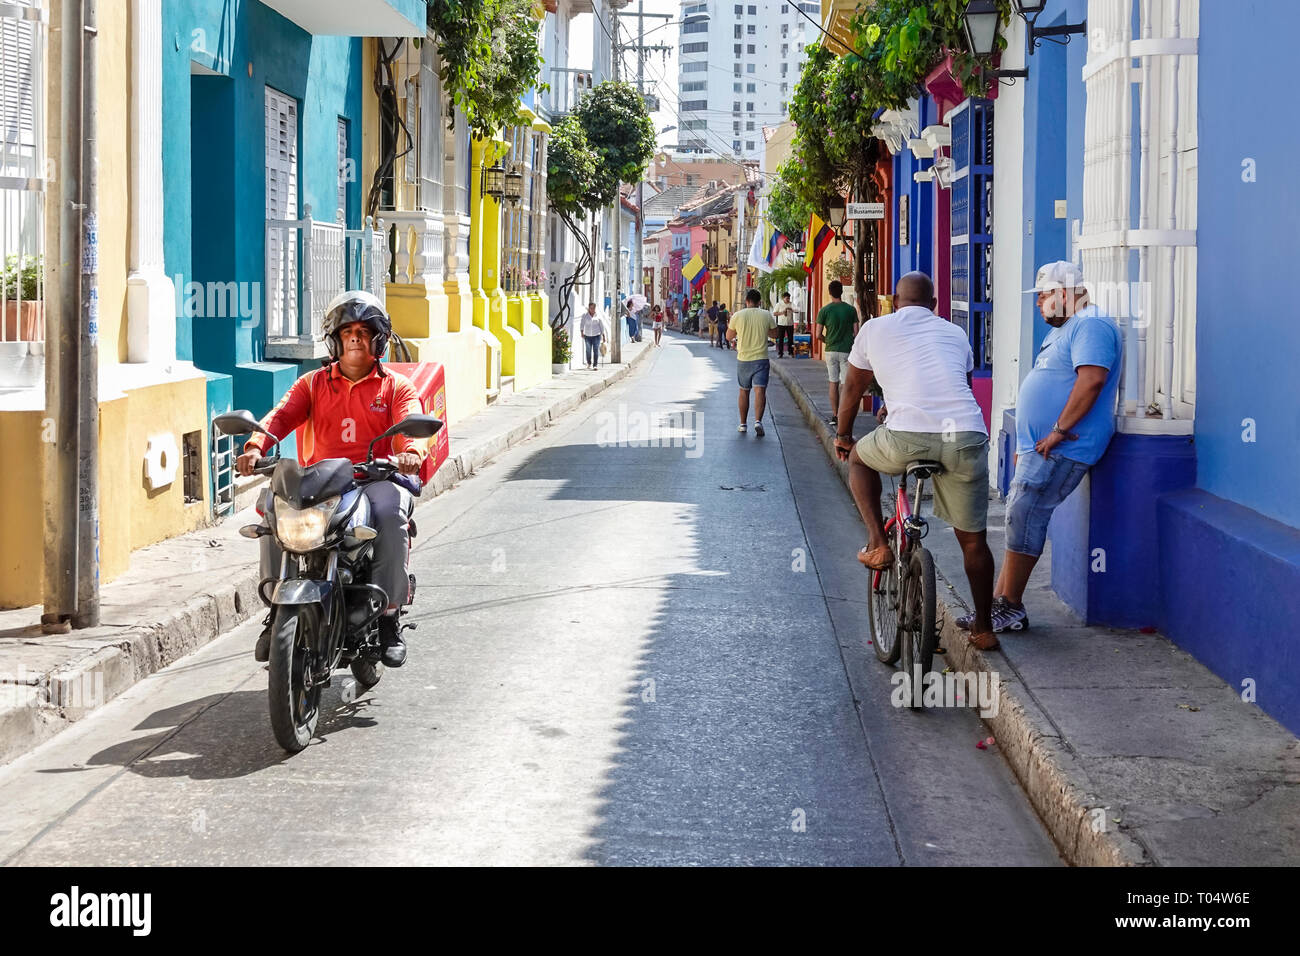 Cartagena Colombia,Center,centre,San Diego,Hispanic resident residents,man men male,motorcycle rider,colorful facades,colonial homes,narrow street,COL Stock Photo